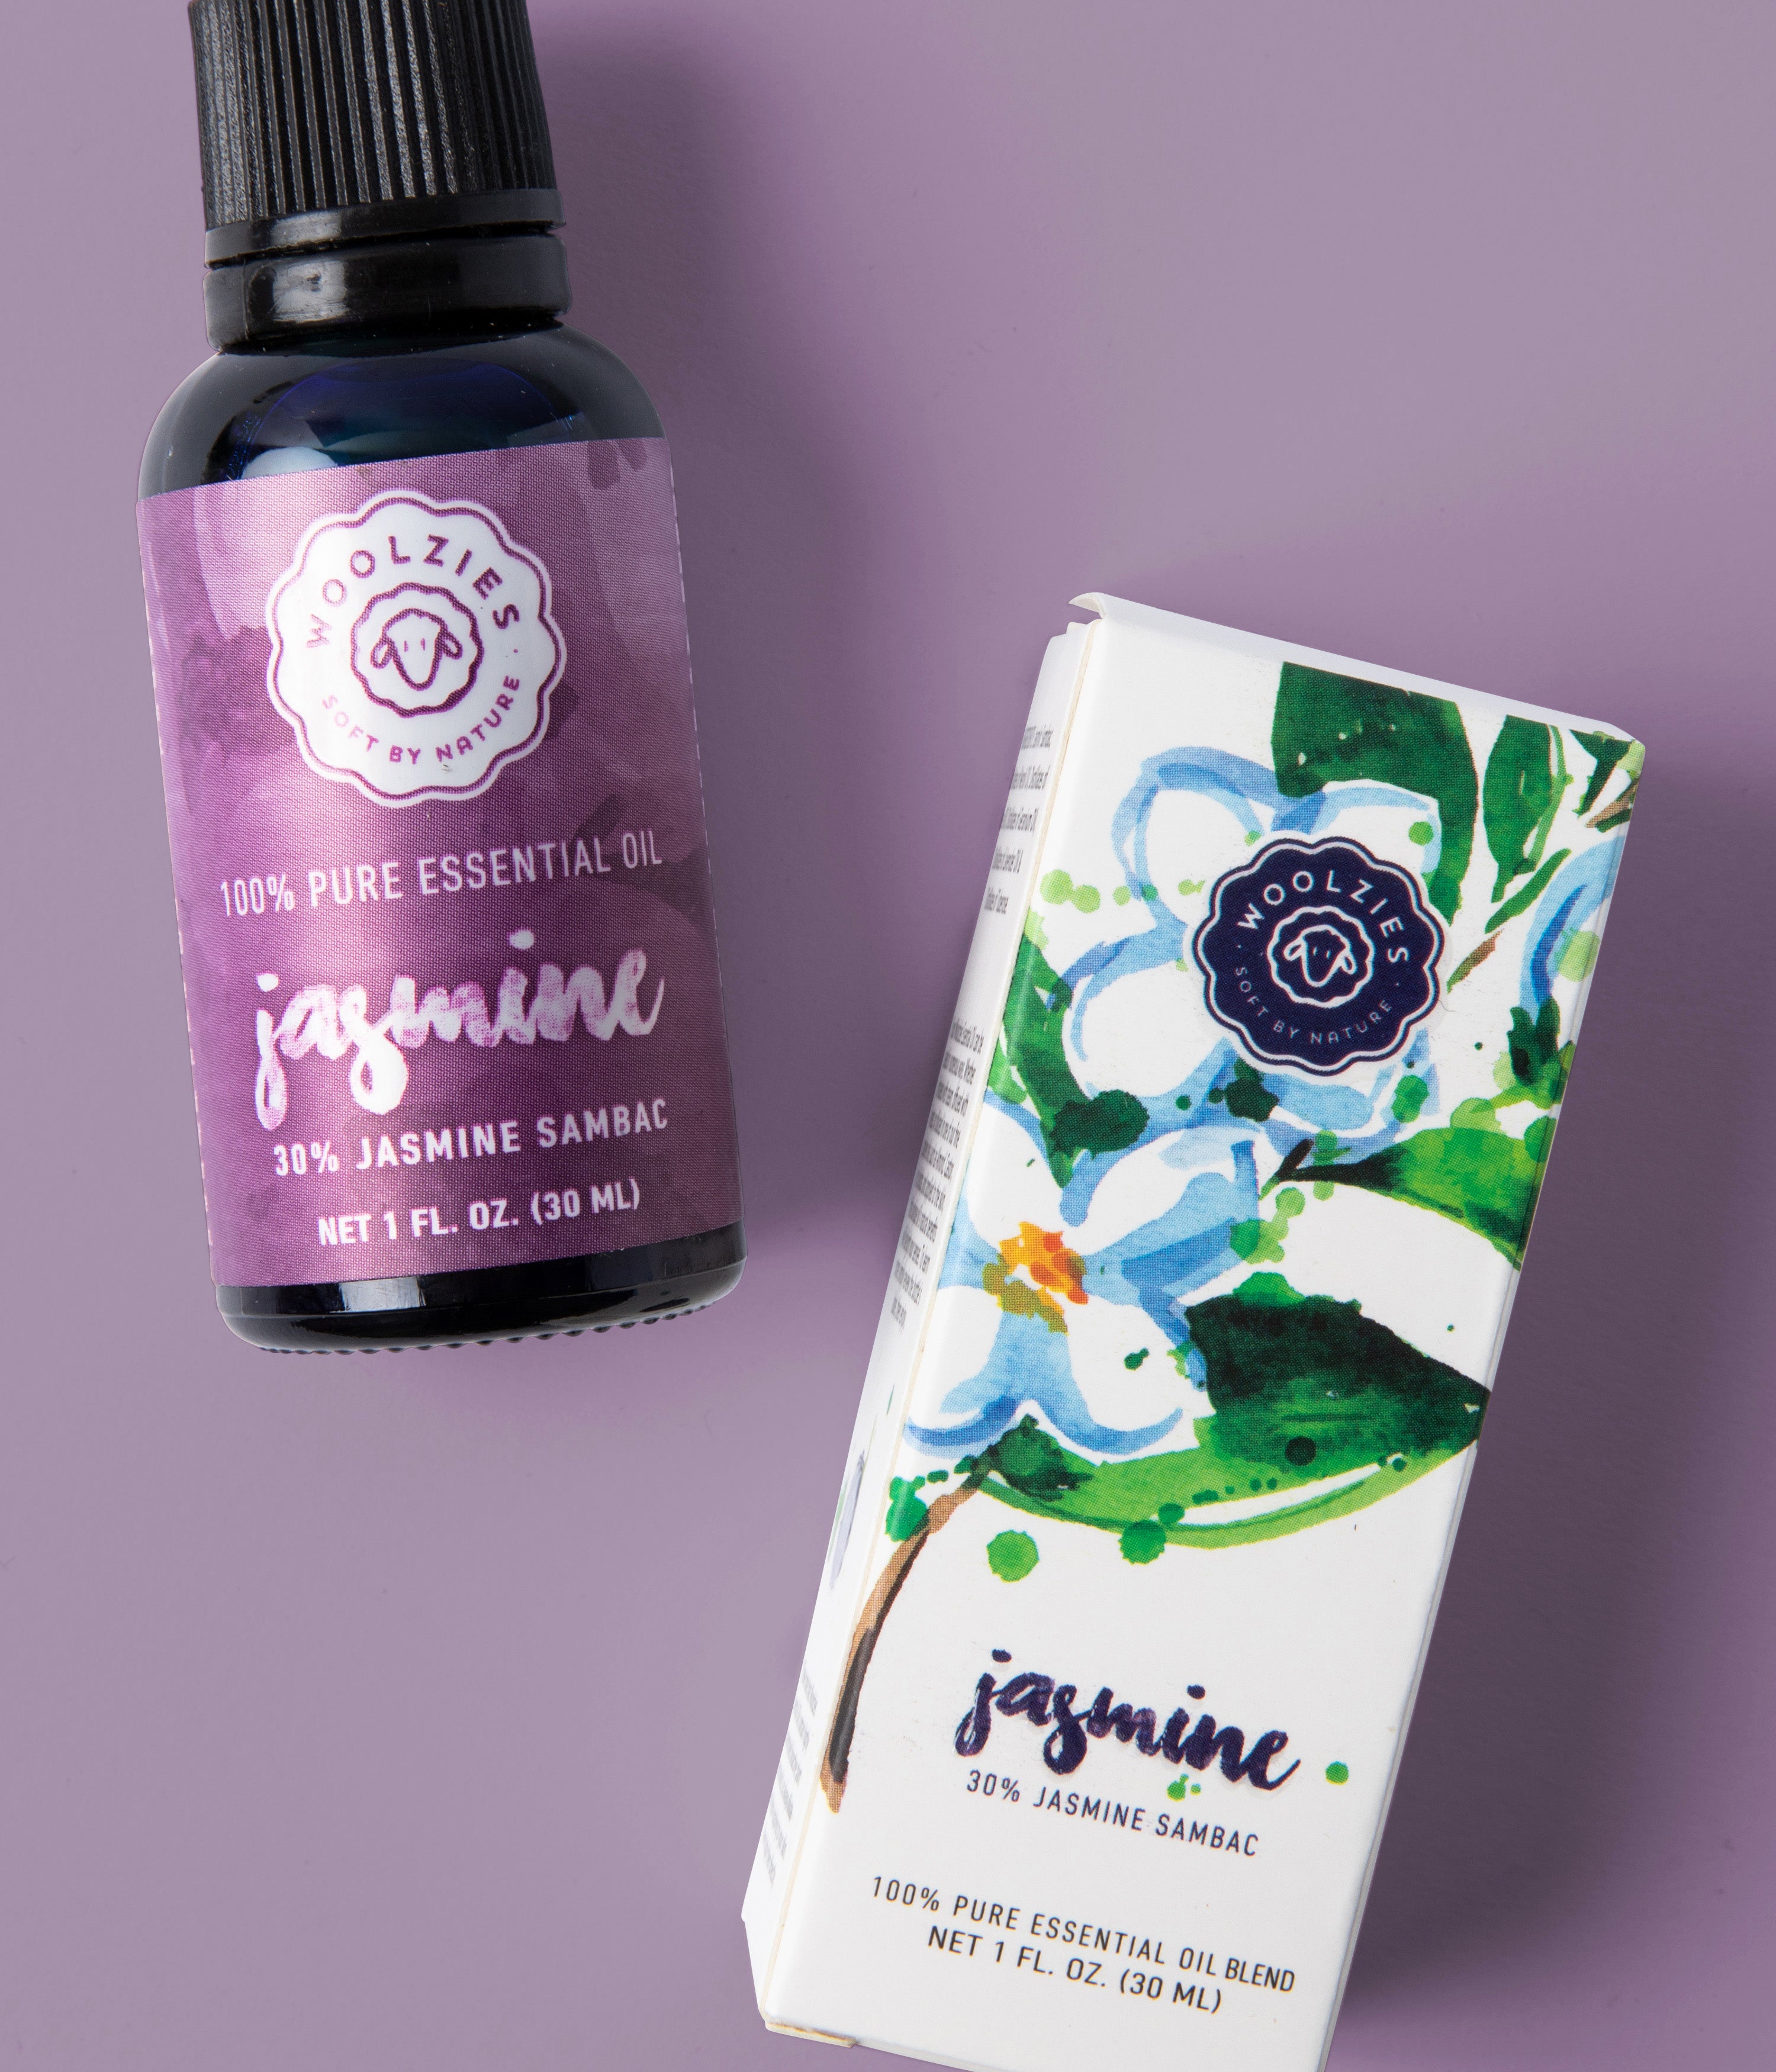 5 Science-Backed Uses for Jasmine Essential Oil (+ 6 Recipes